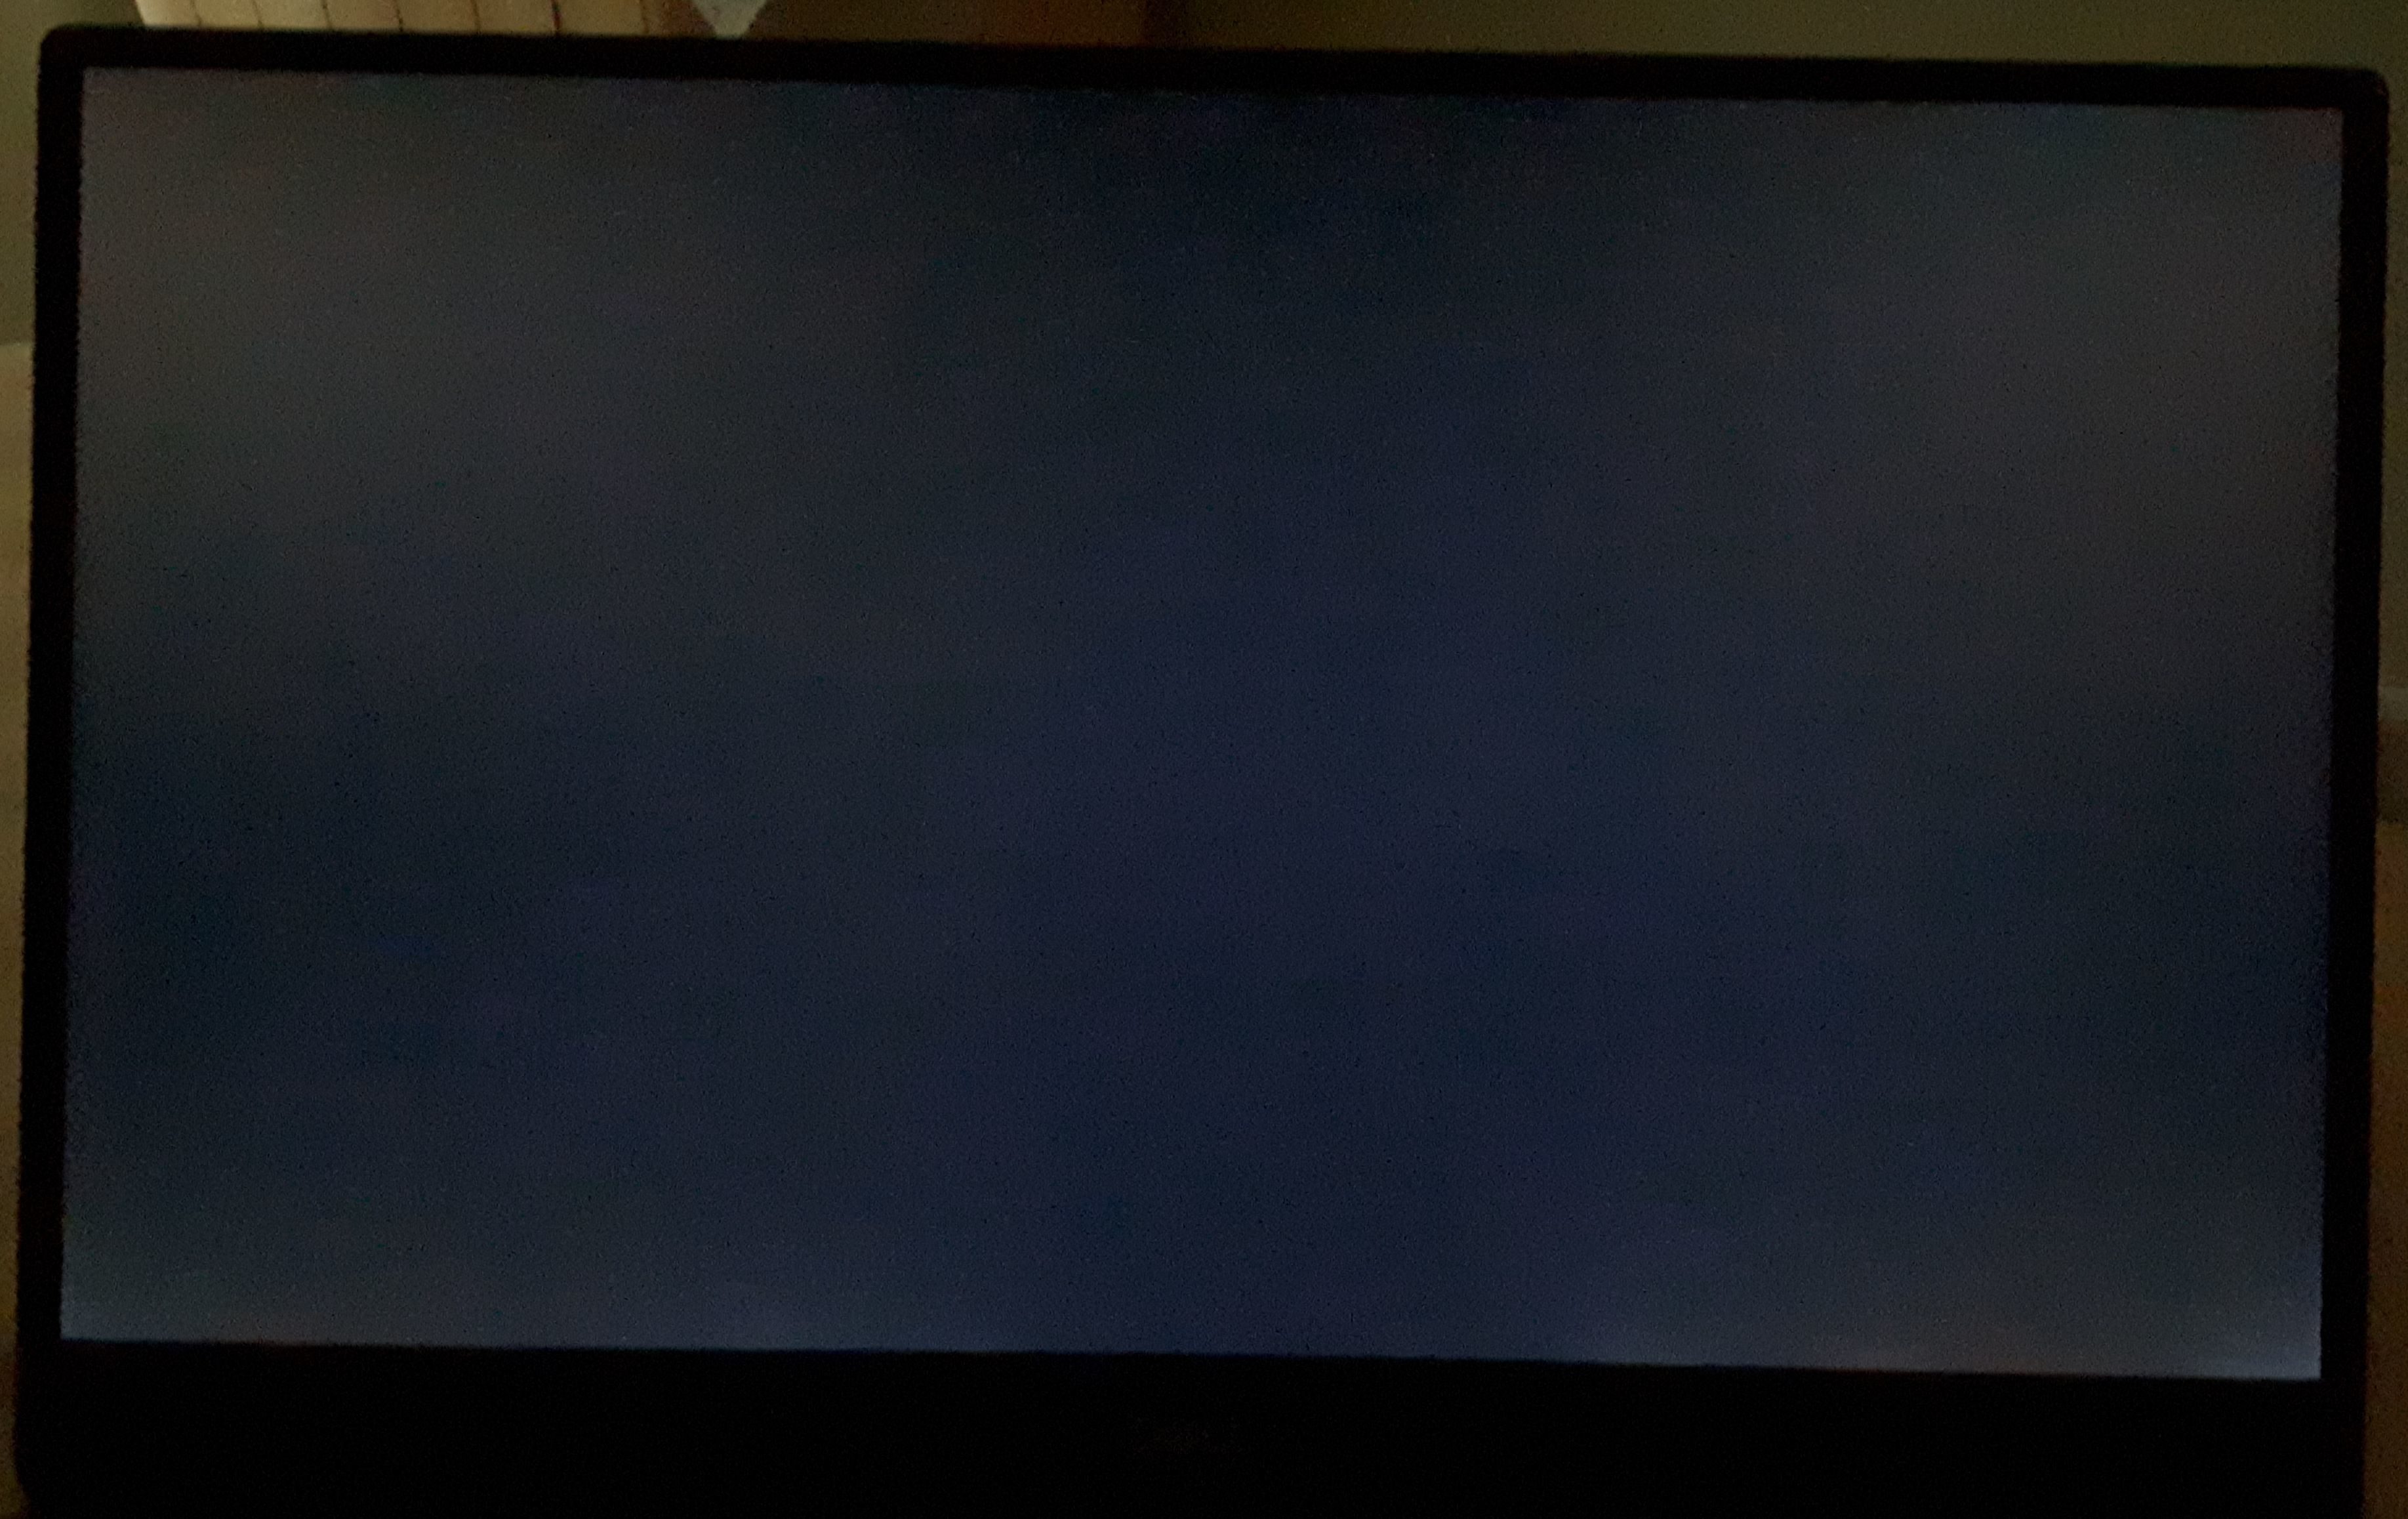 The XPS 15 FHD have always been succeptable to backlight bleed. Luckily, this panel is not too off-centered.